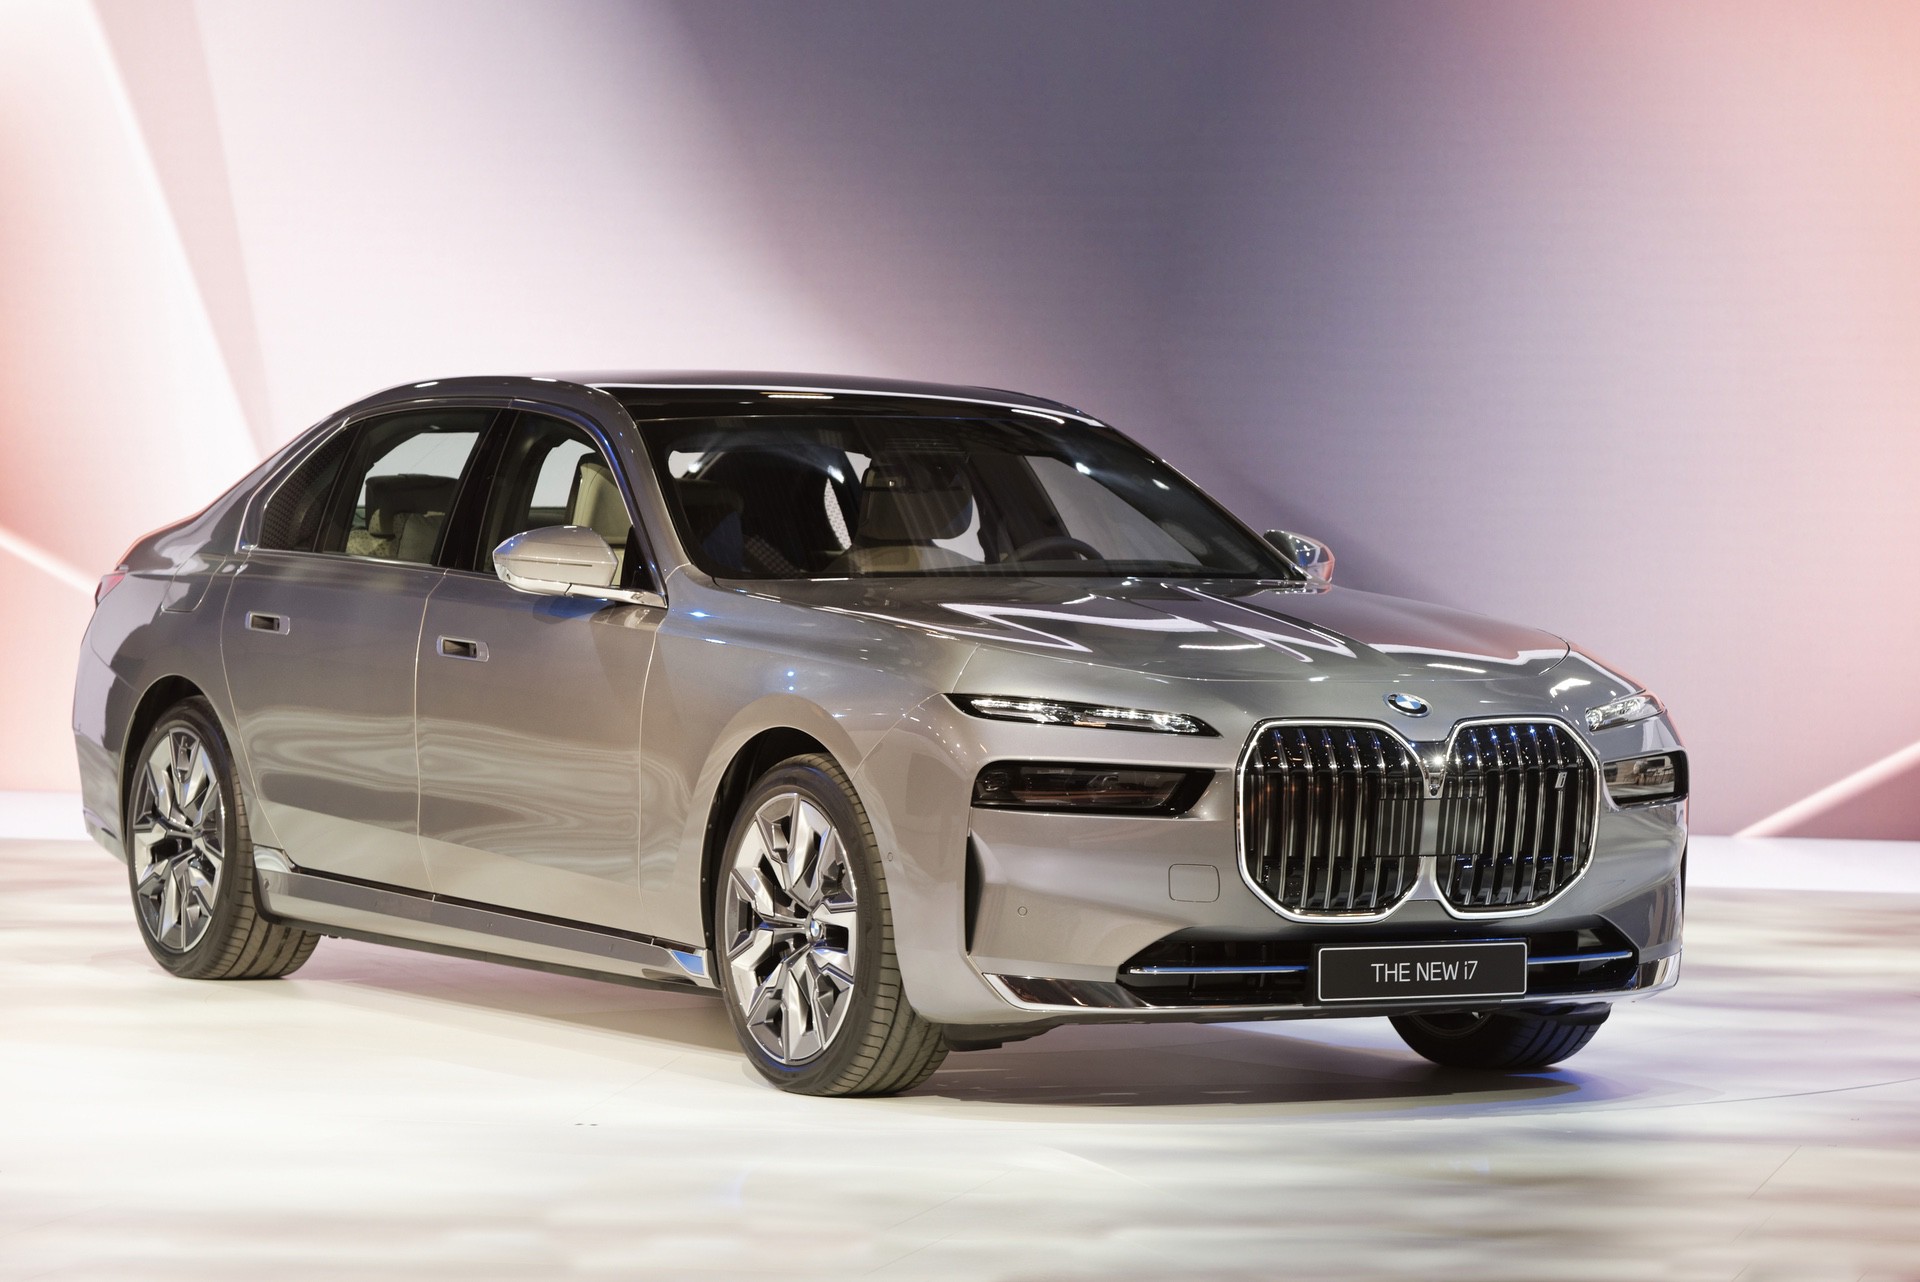 Heaviest 2023 BMW 7 Series is the i7 at 2,640 KG (5,820 LBS)